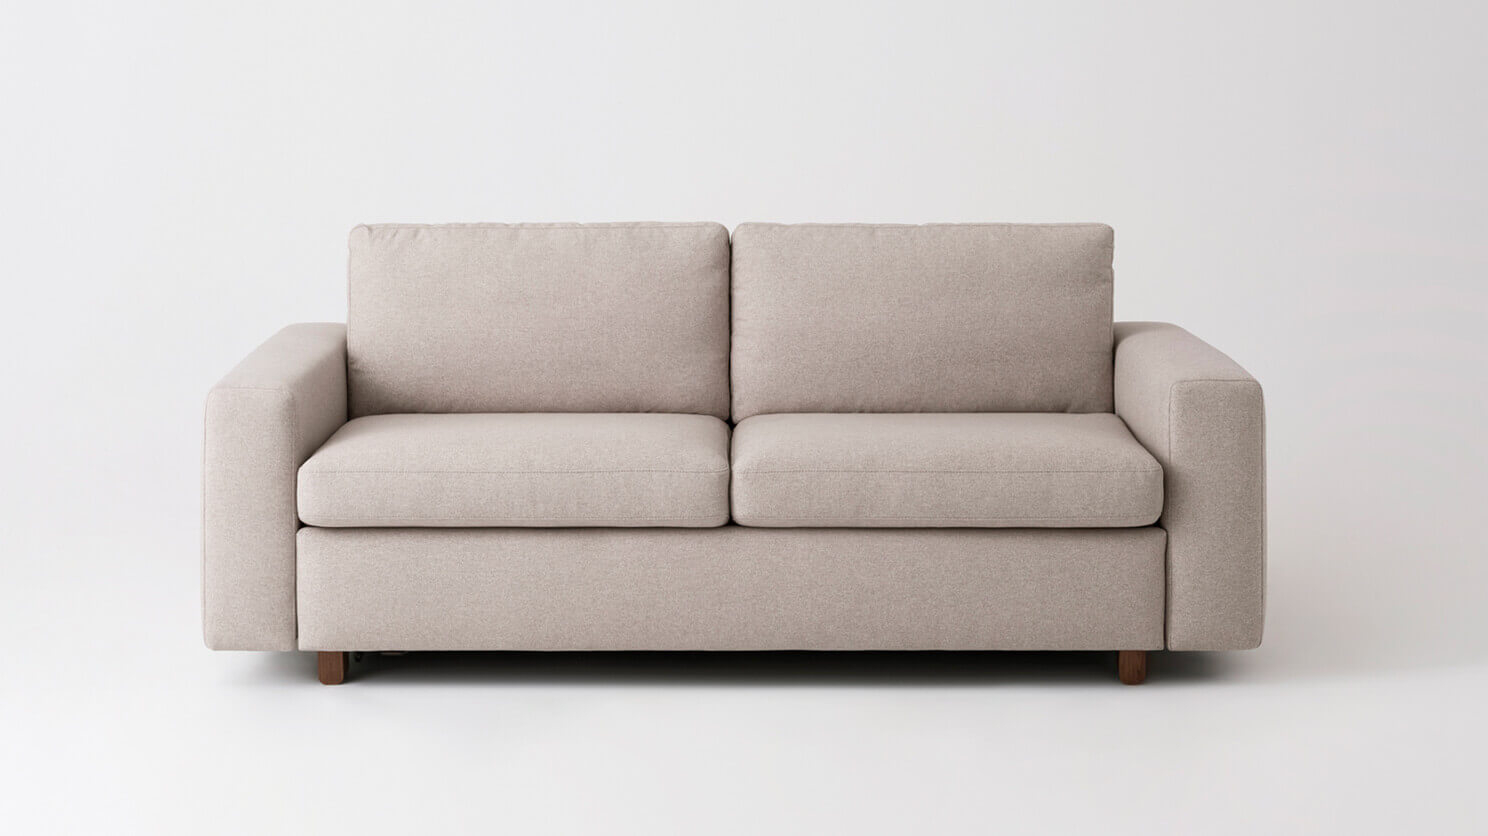 eq3 sofa bed review